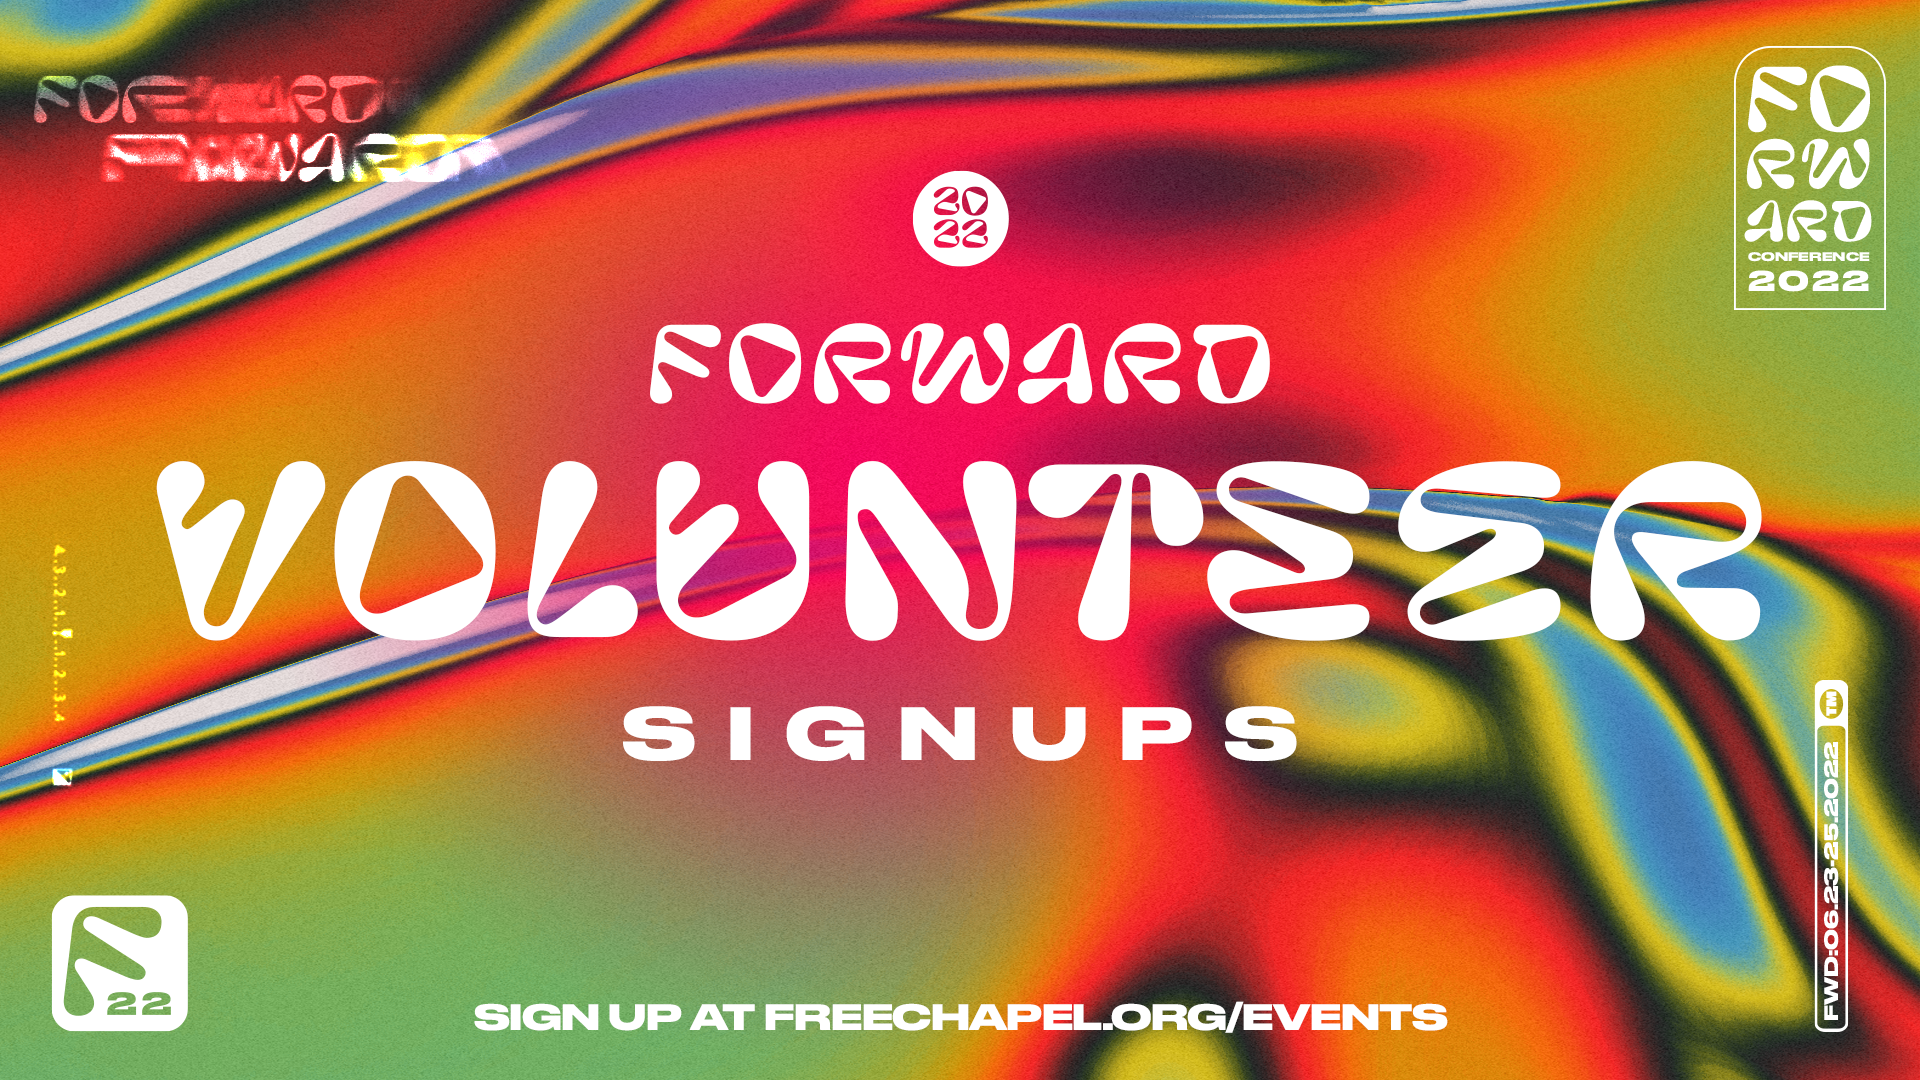 Forward Volunteer Sign Up at the Braselton campus